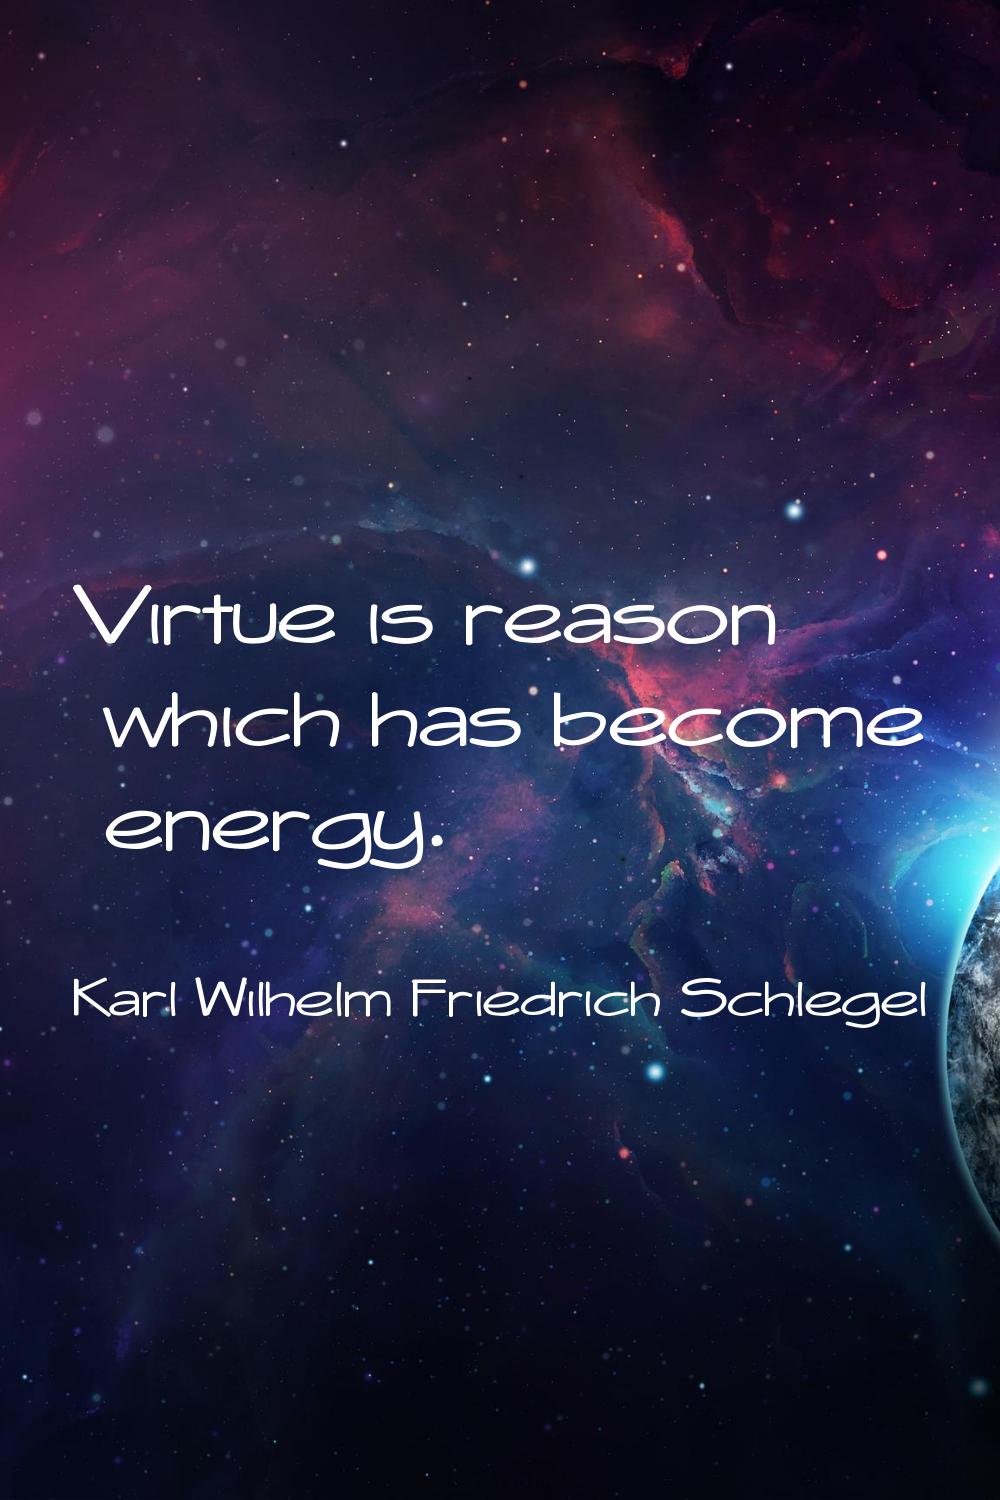 Virtue is reason which has become energy.